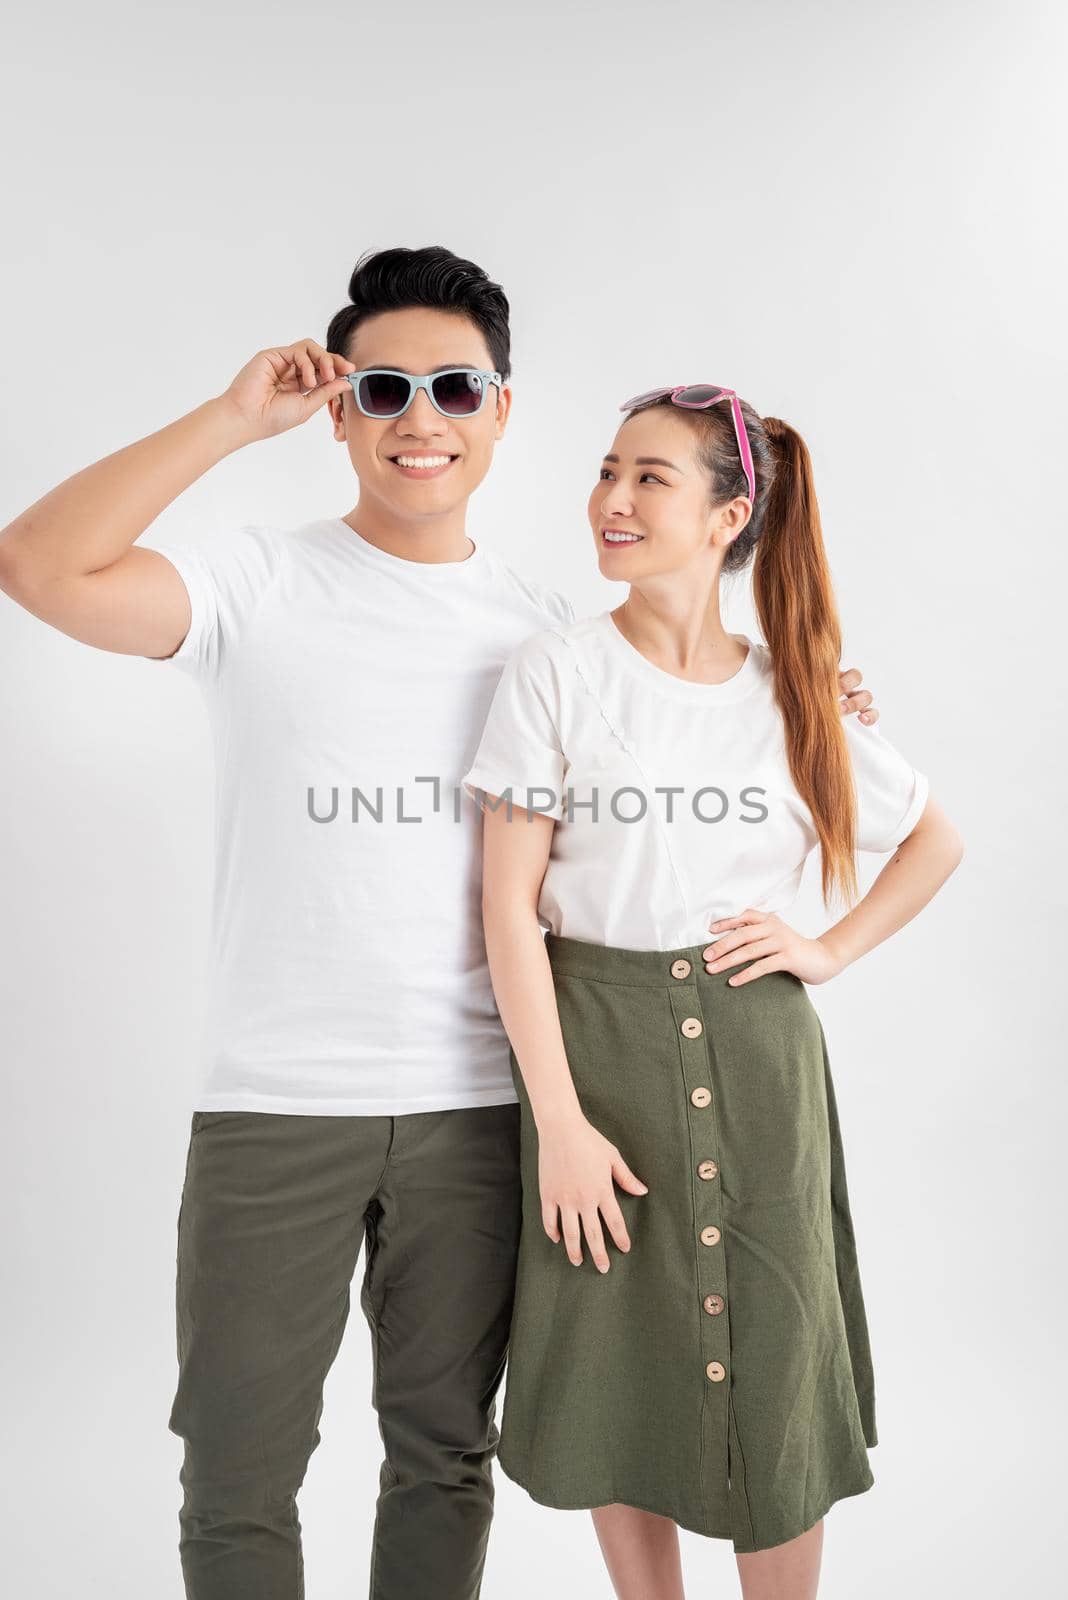 Surprised young couple looking at camera. Front view of excited young man and woman standing together and looking at camera on white background. Emotion concept by makidotvn